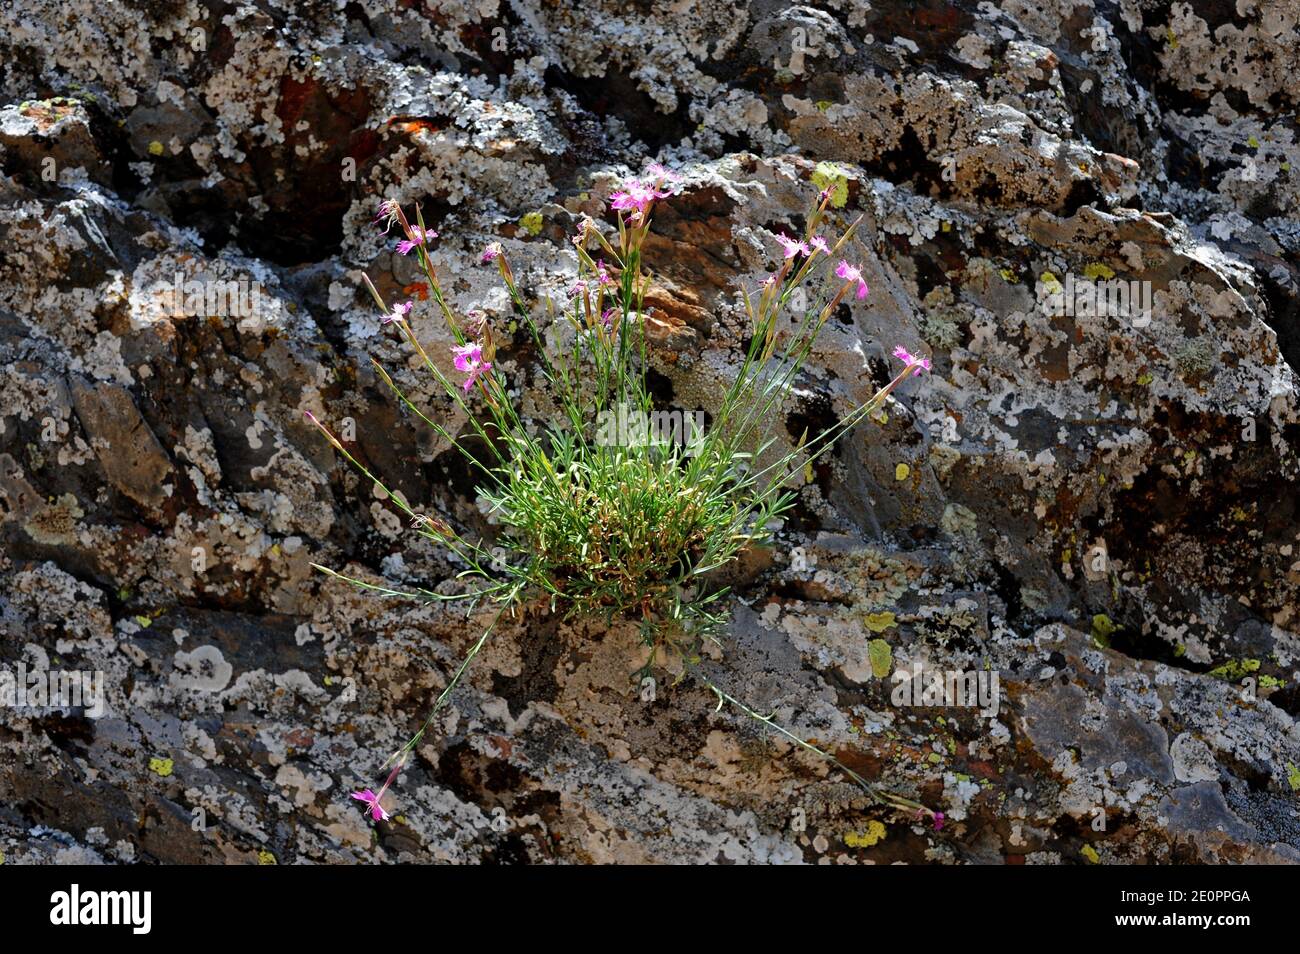 Clavellina lusitana (Dianthus lusitanus) is a perennial herb native to Iberian Peninsula and North Africa. This photo was taken in Pena de Francia, Stock Photo